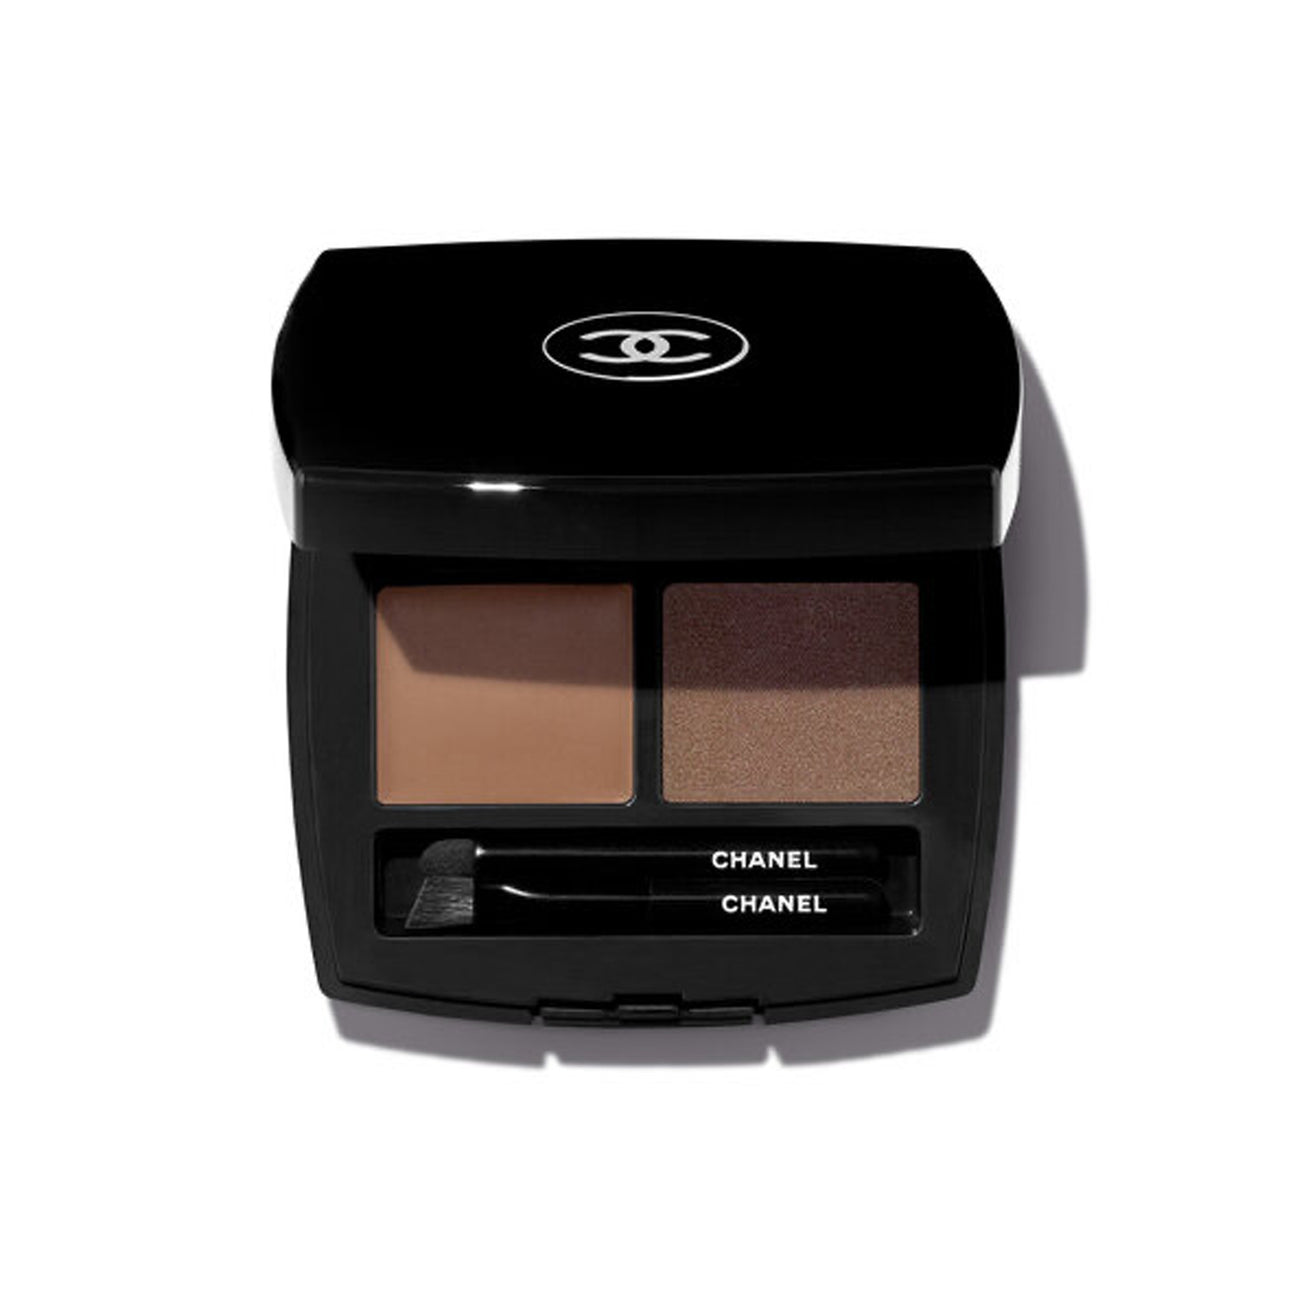 CHANEL Brow Wax And Brow Powder Duo With Accessories